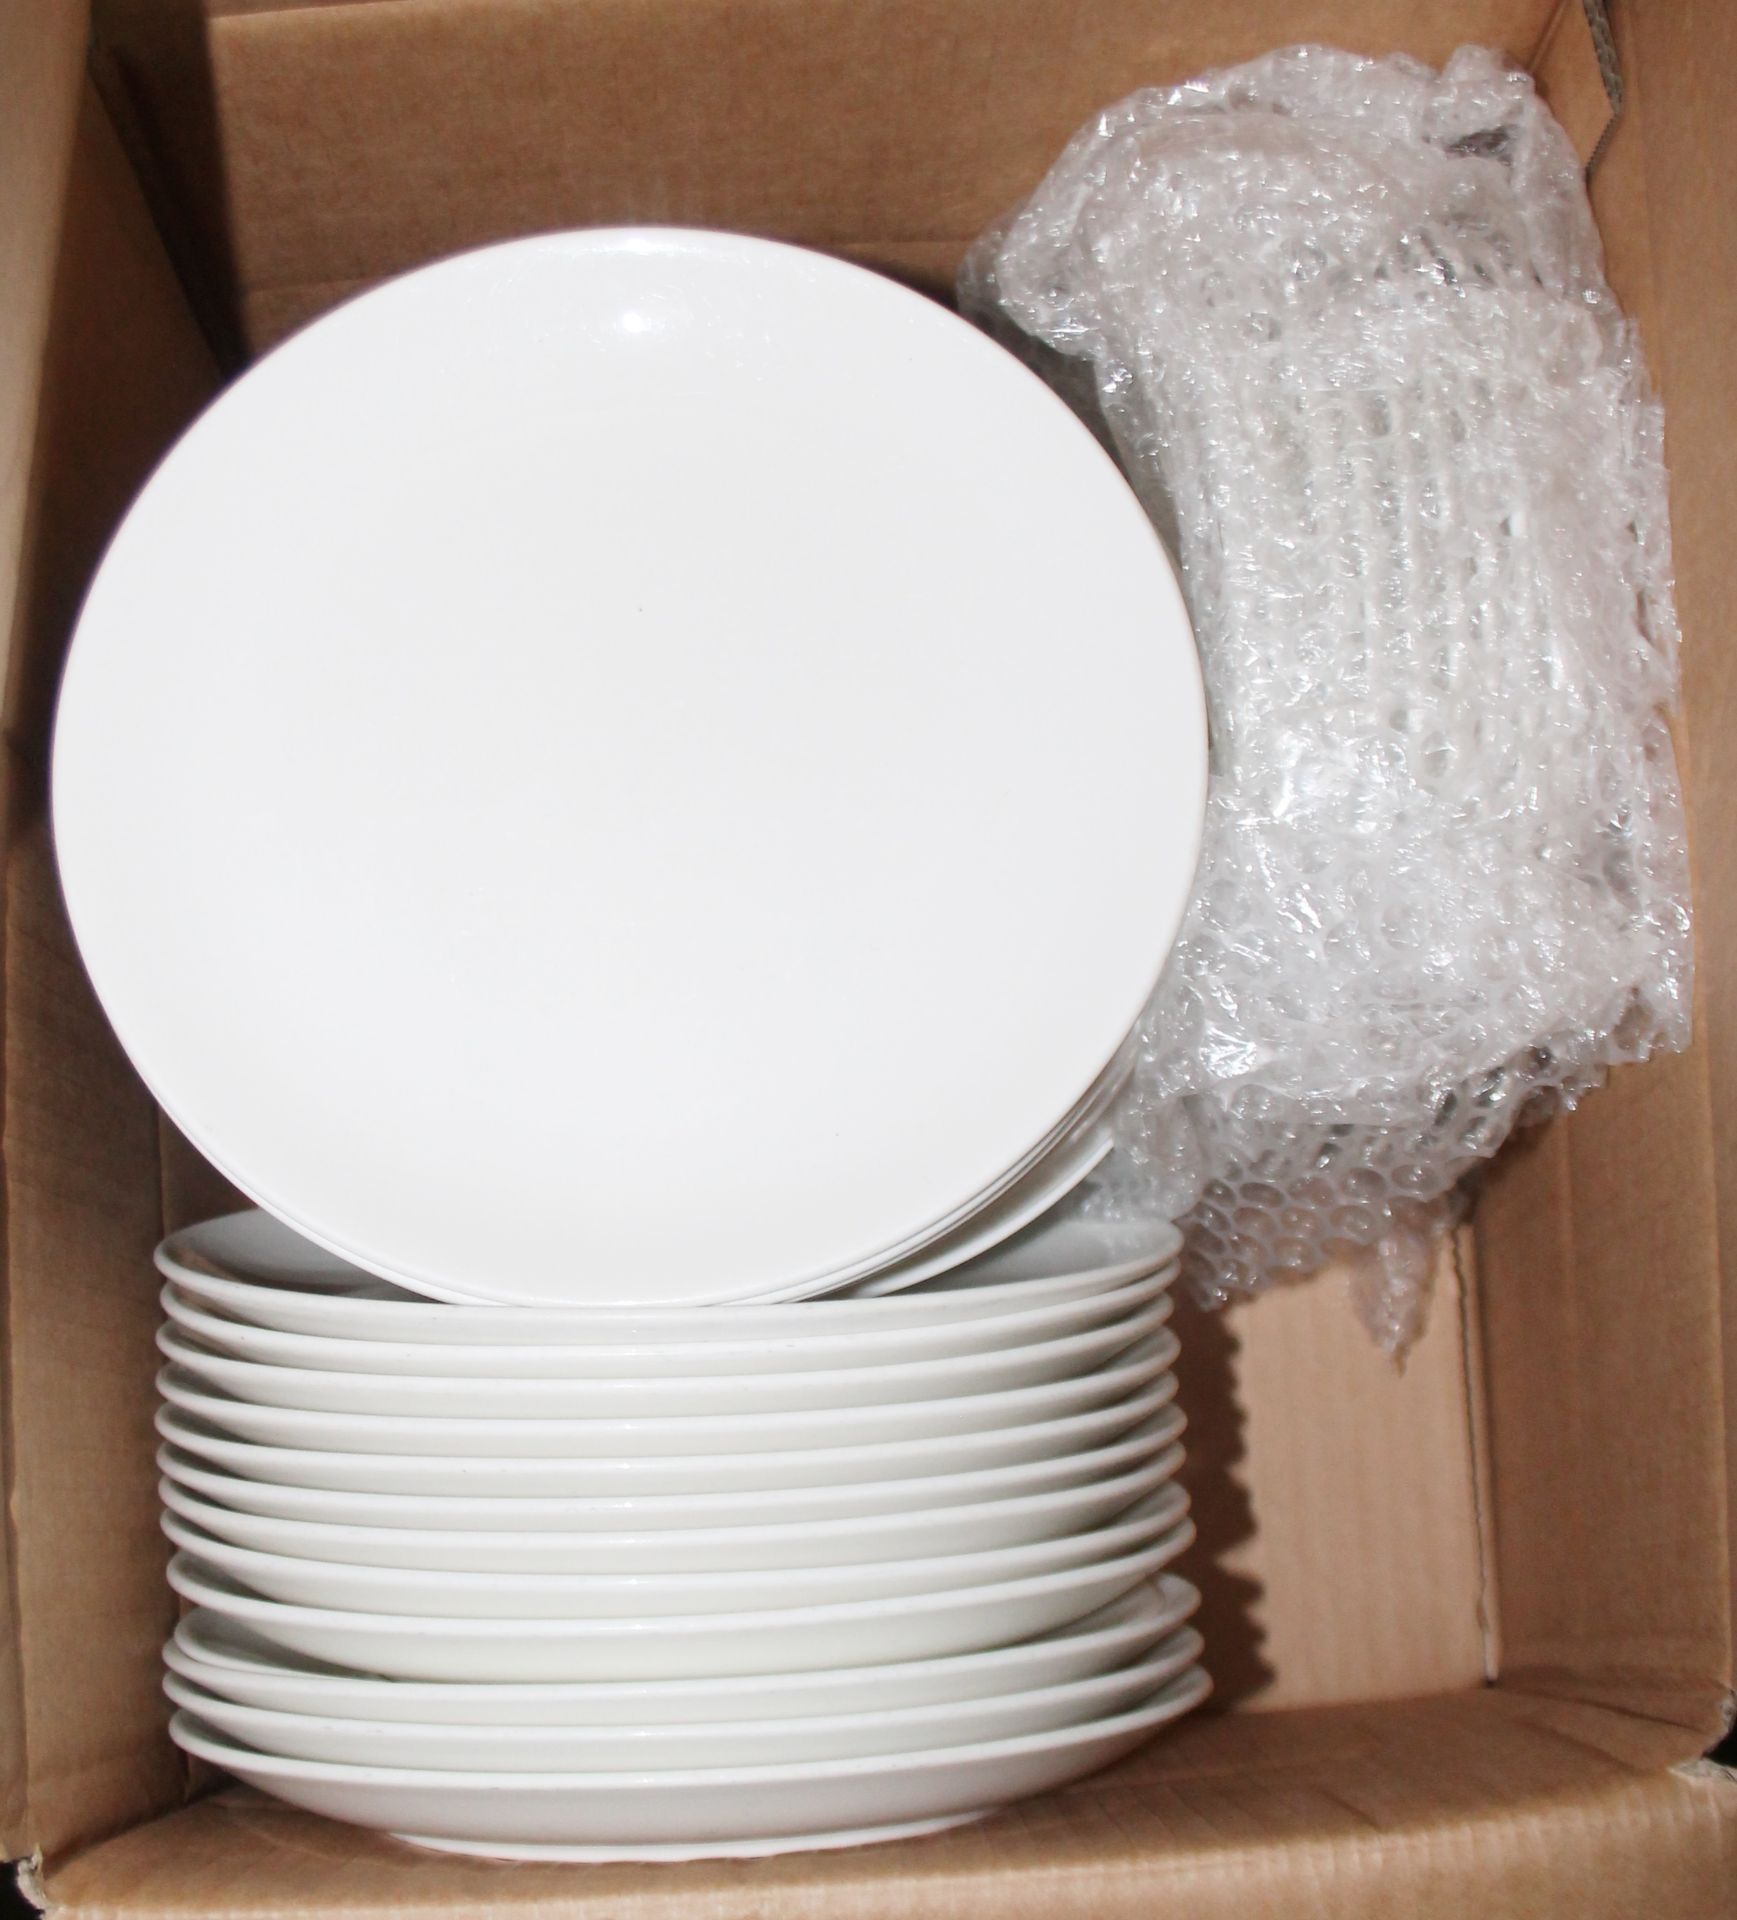 45 x Elia ORIENTIX Fine China Commercial Side / Starter Plates - 21.5cm In Diameter - Image 3 of 5